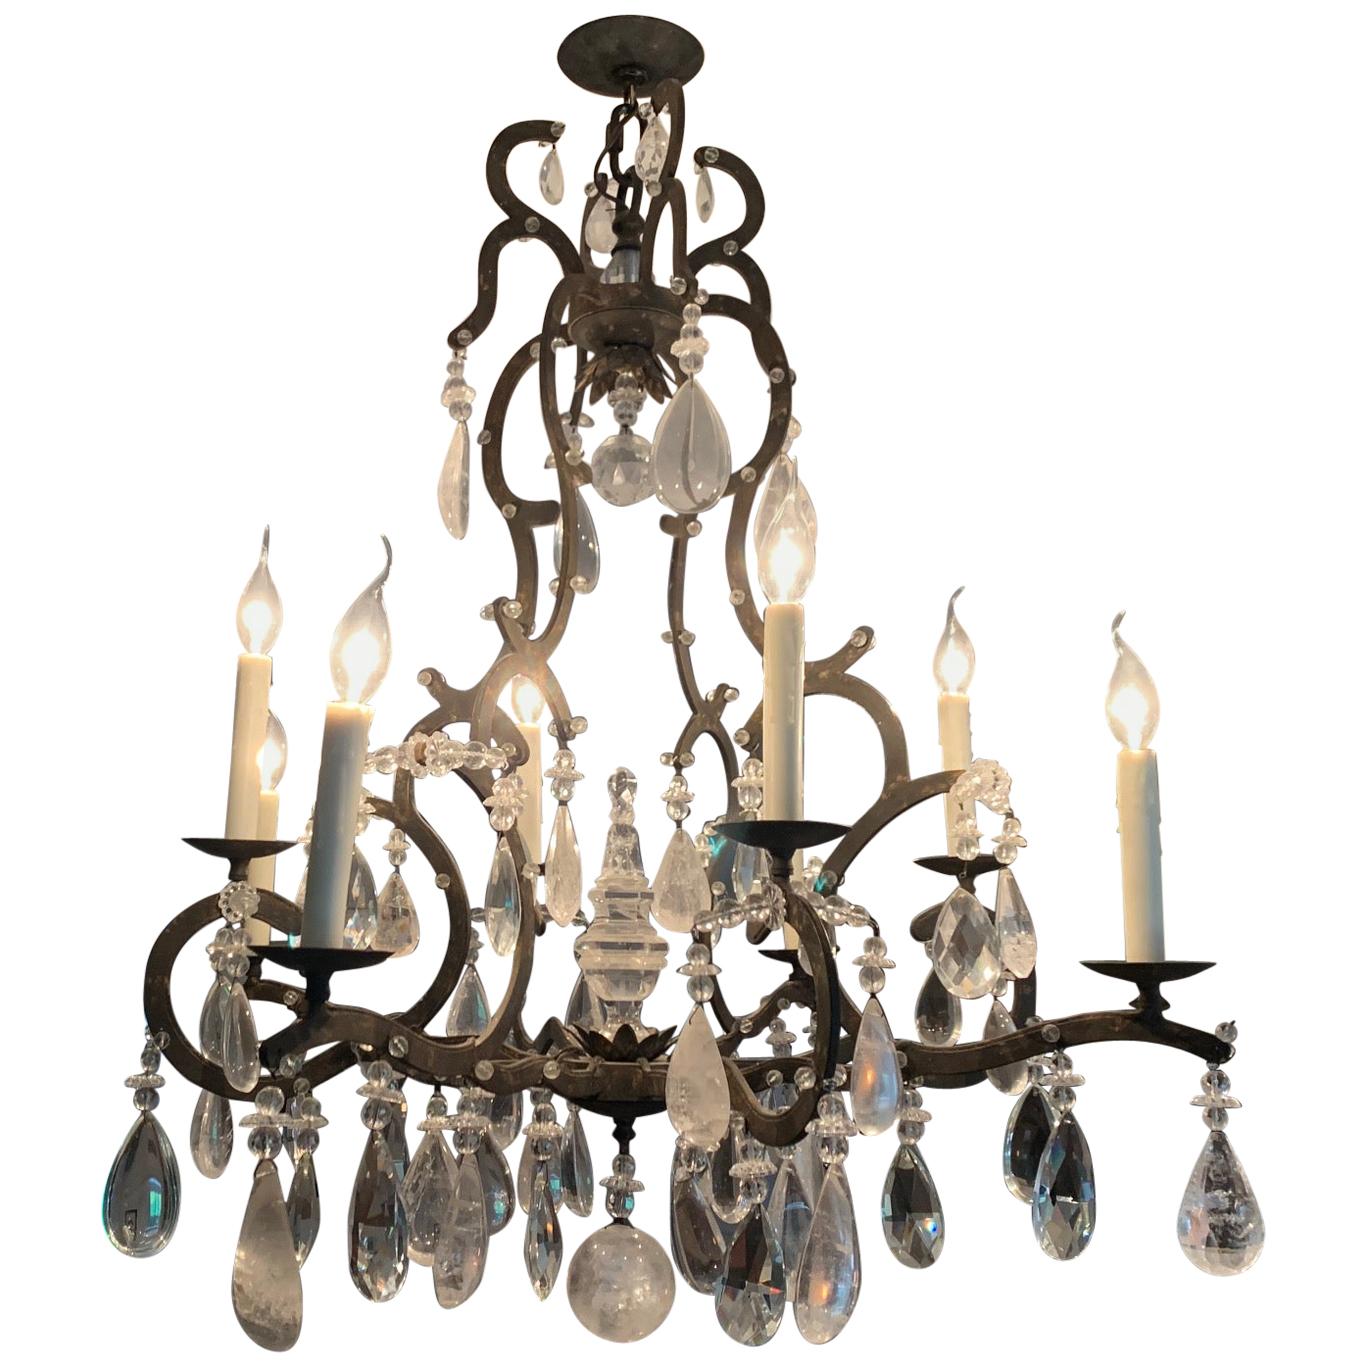 Impressive Farmhouse Chic Large Wrought Iron and Crystal Adorned Chandelier